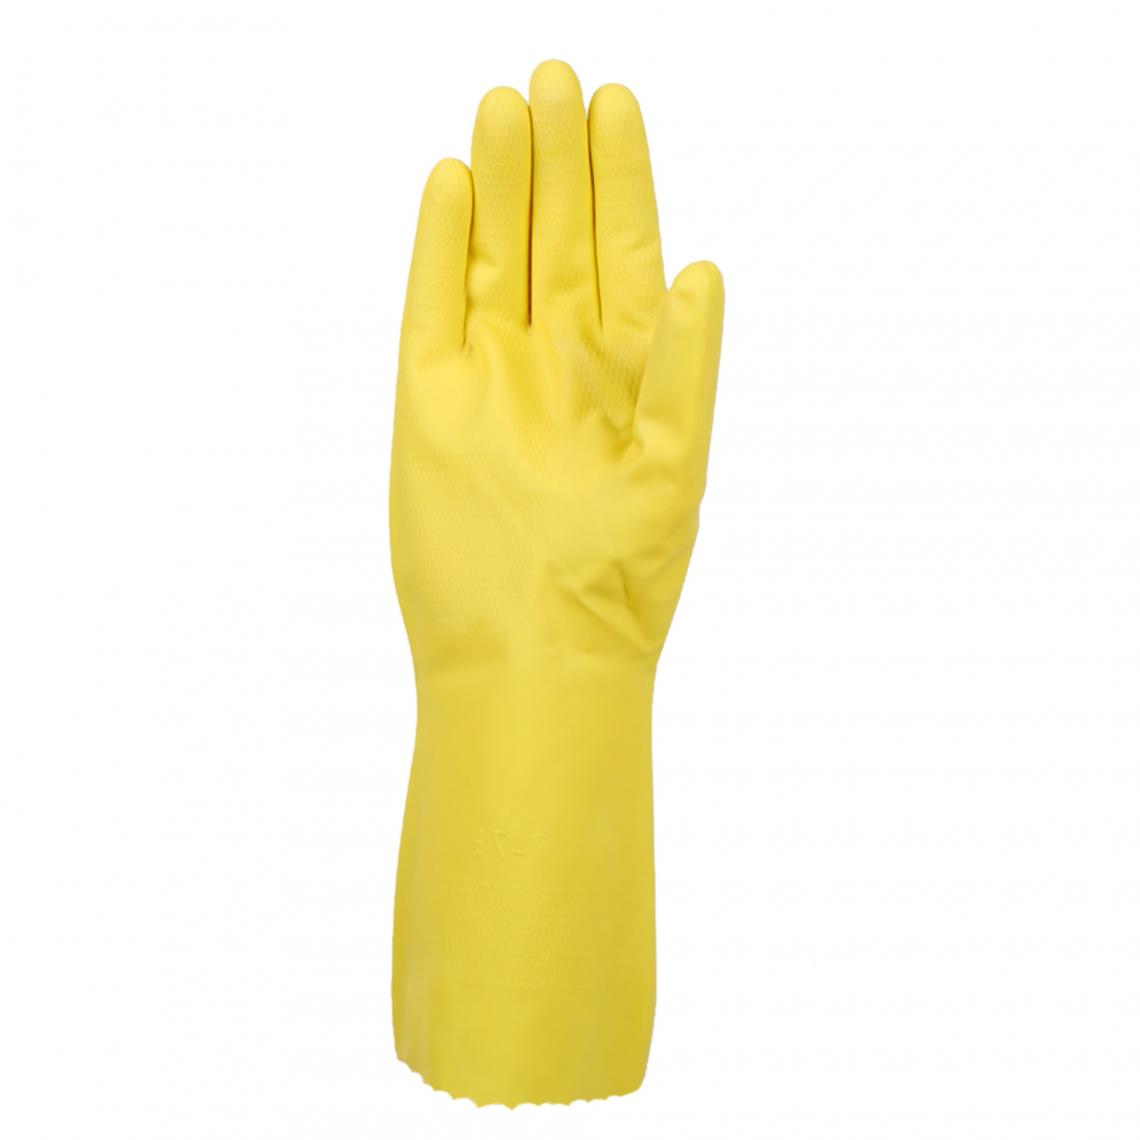 Horizon 15-Mil Diamond Textured Palm Latex Janitorial Gloves - Pack of 12 Pairs Work Gloves and Hats - Cleanflow